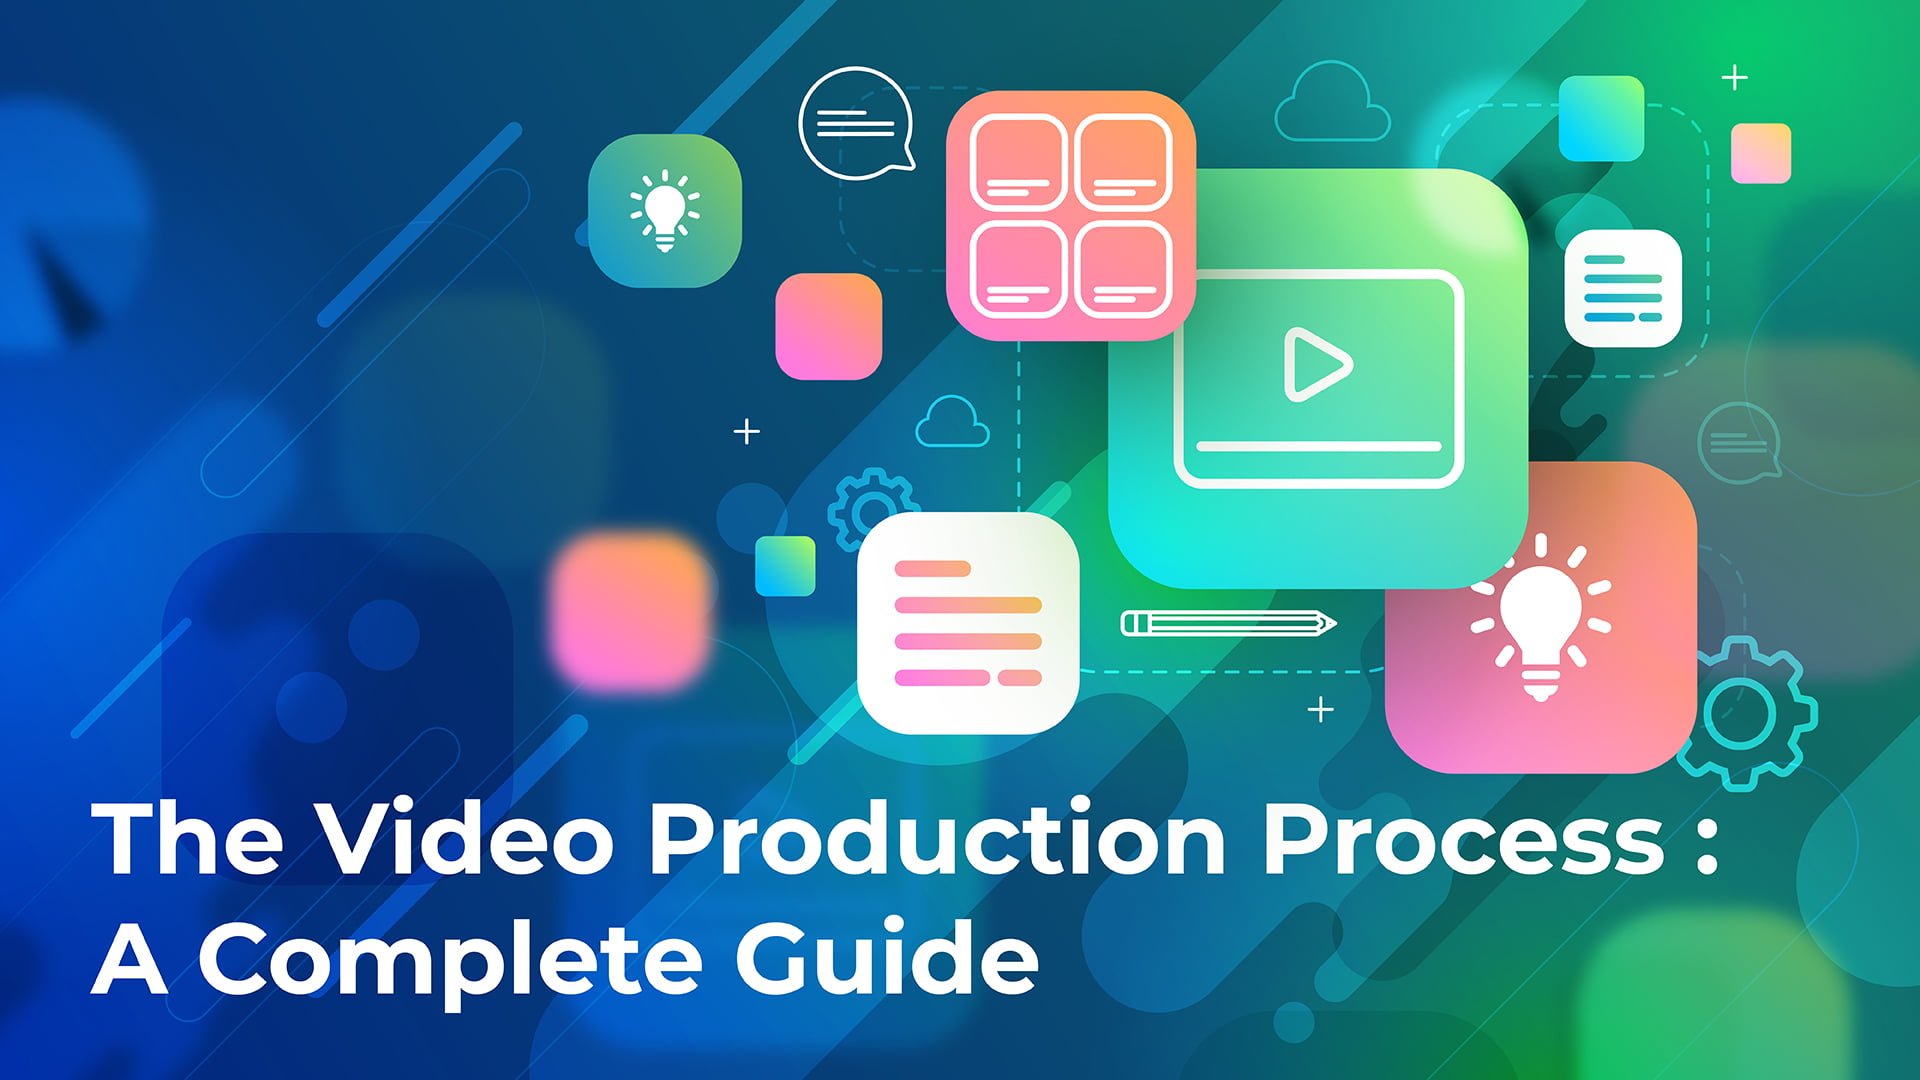 The Video Production Process: A Complete Guide